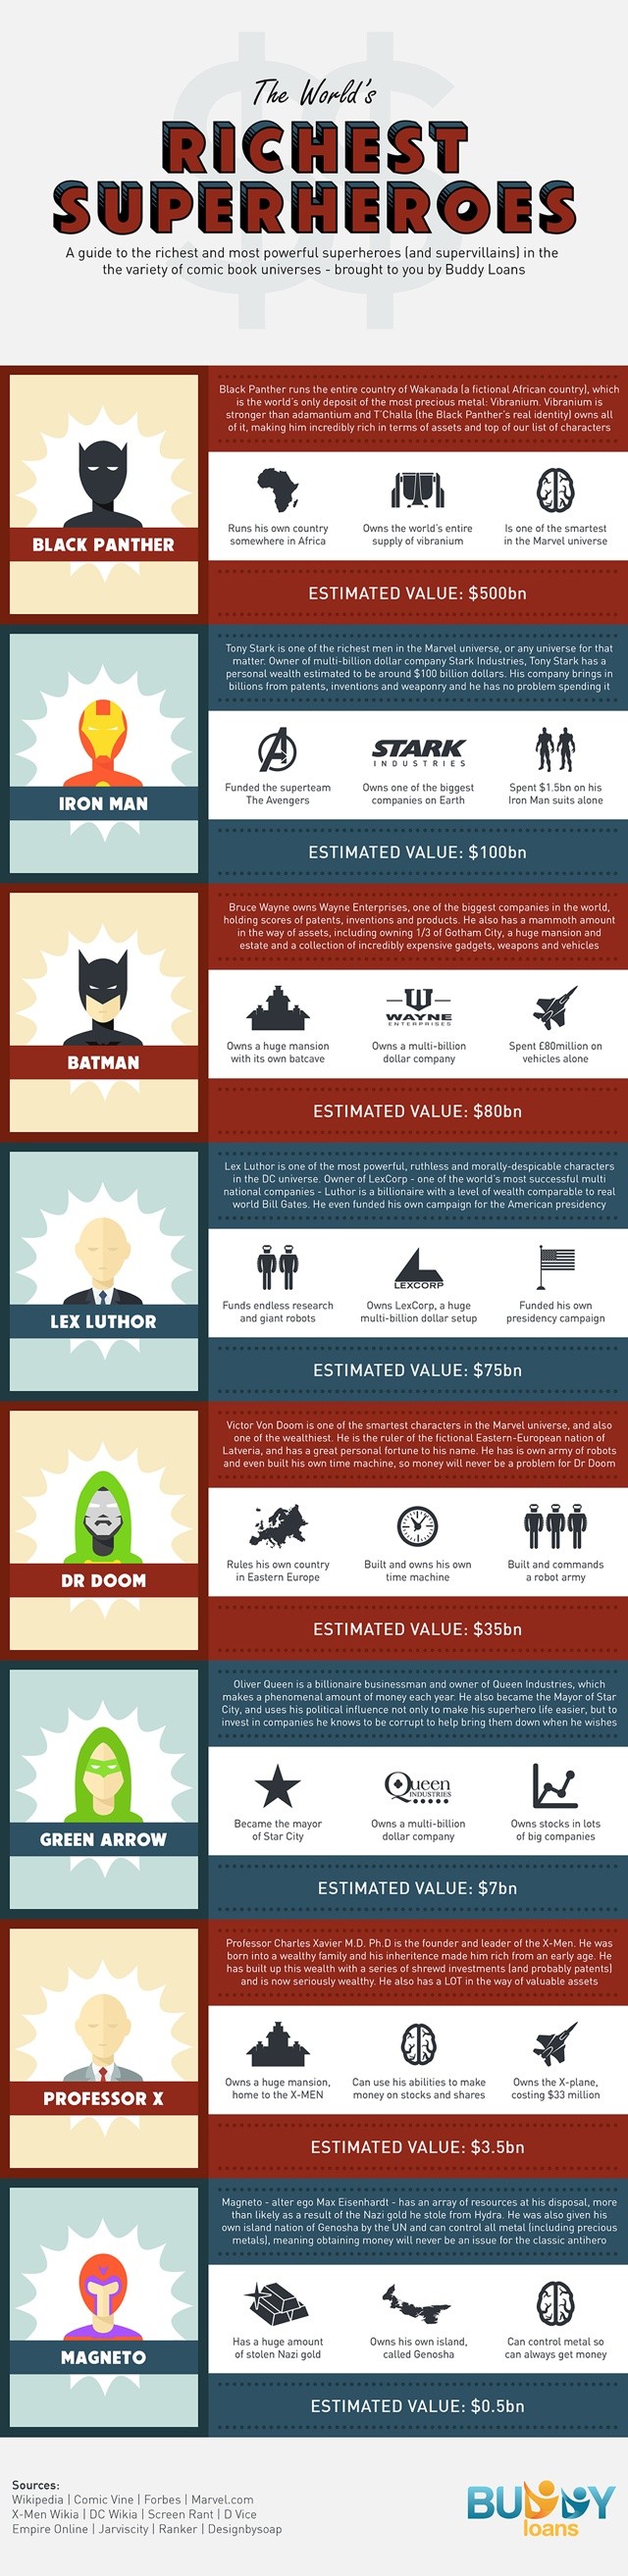 RICHEST HEROES